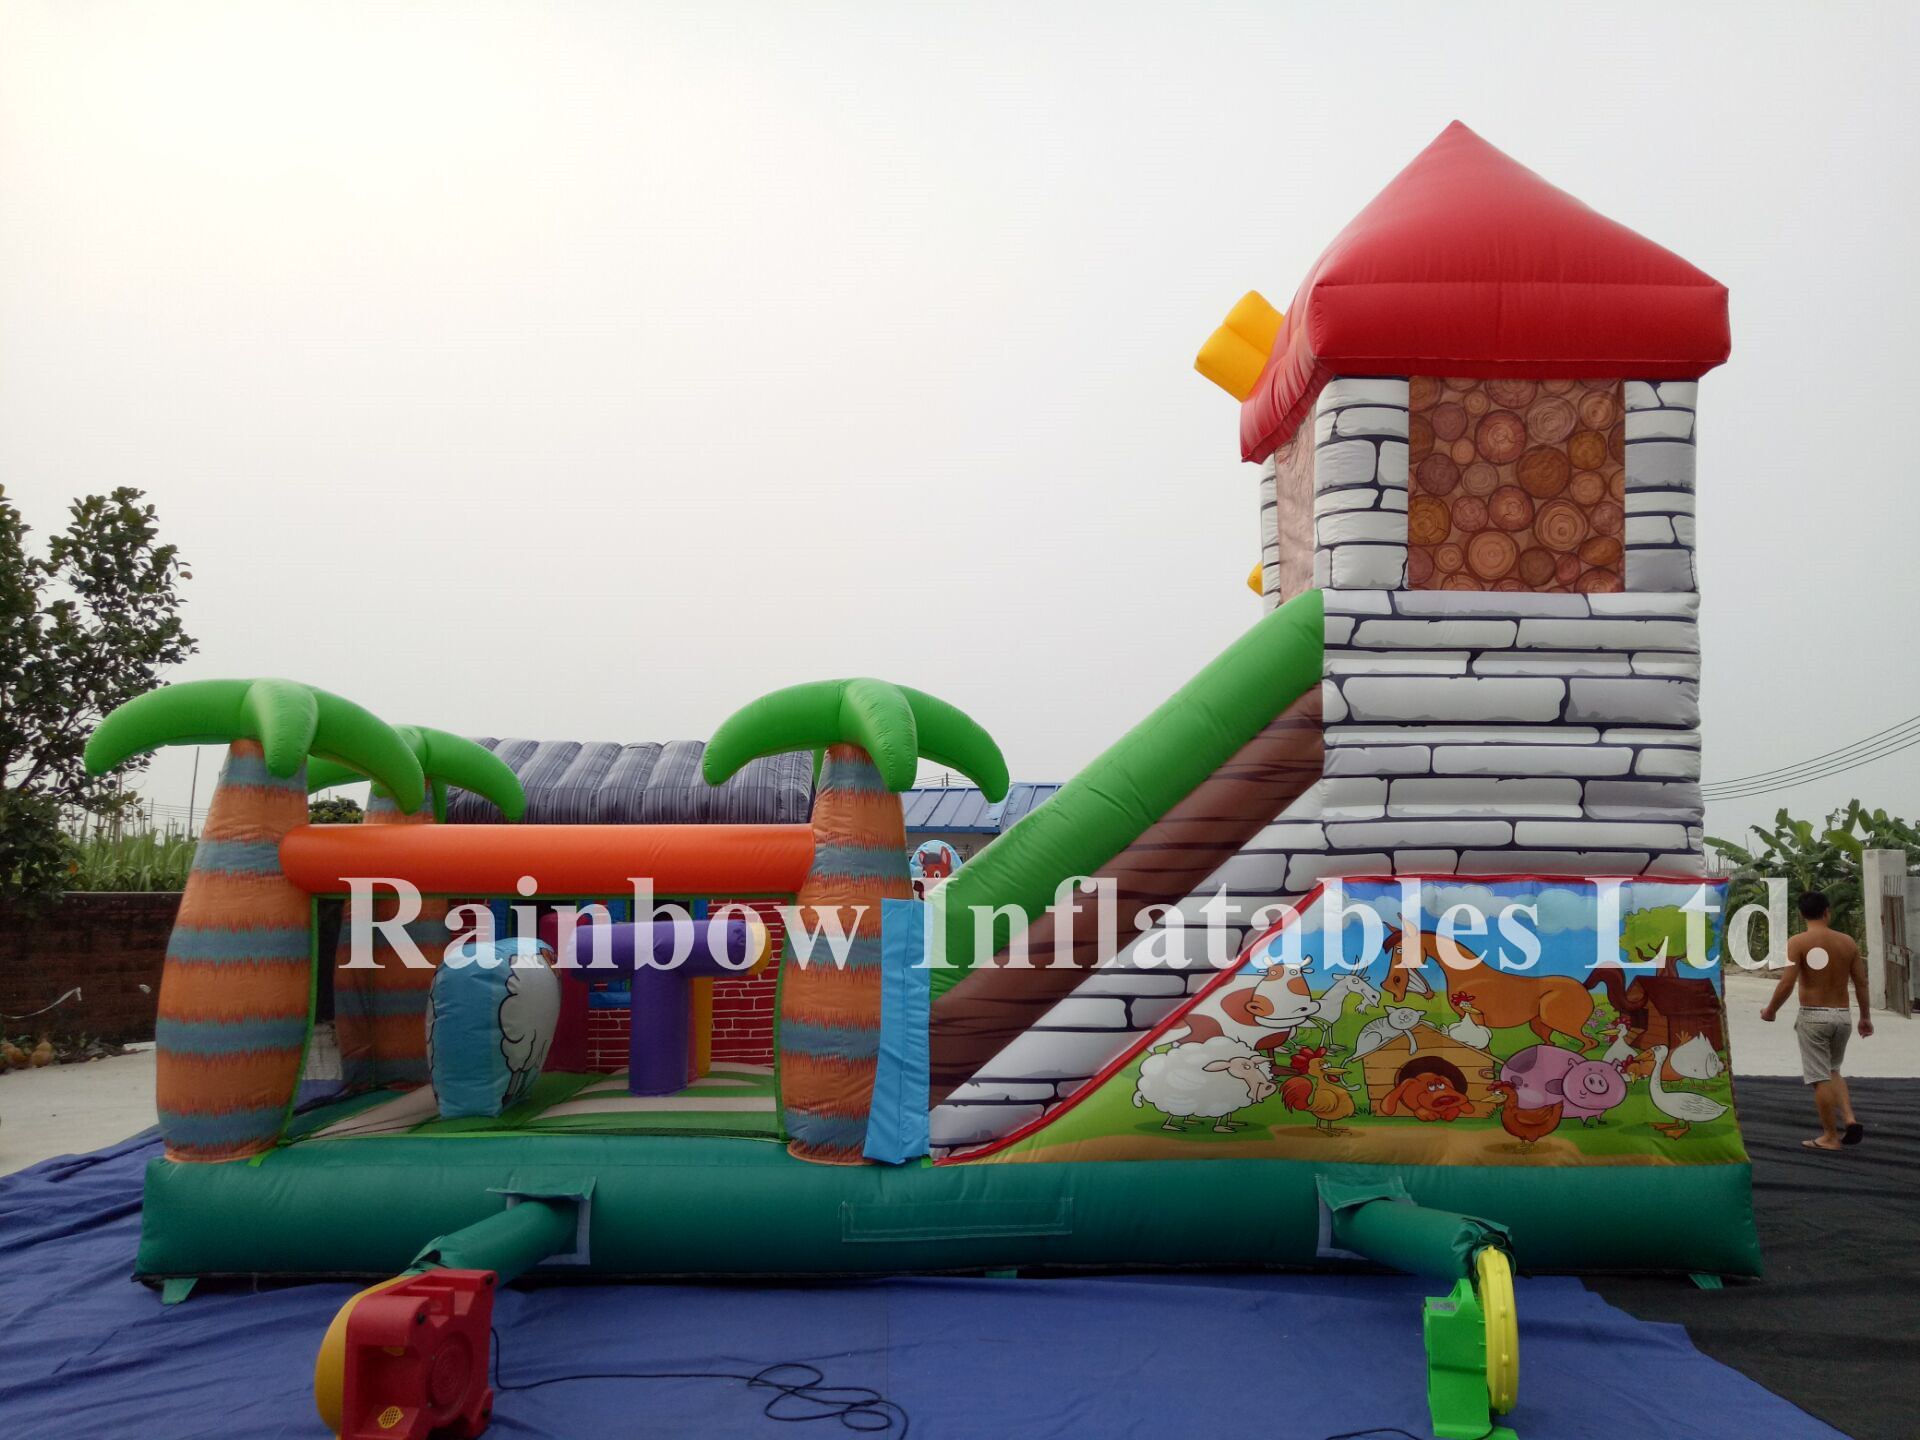 Commercial Mini Inflatable Animal Farm Bounce Playground Funcity for Toddlers